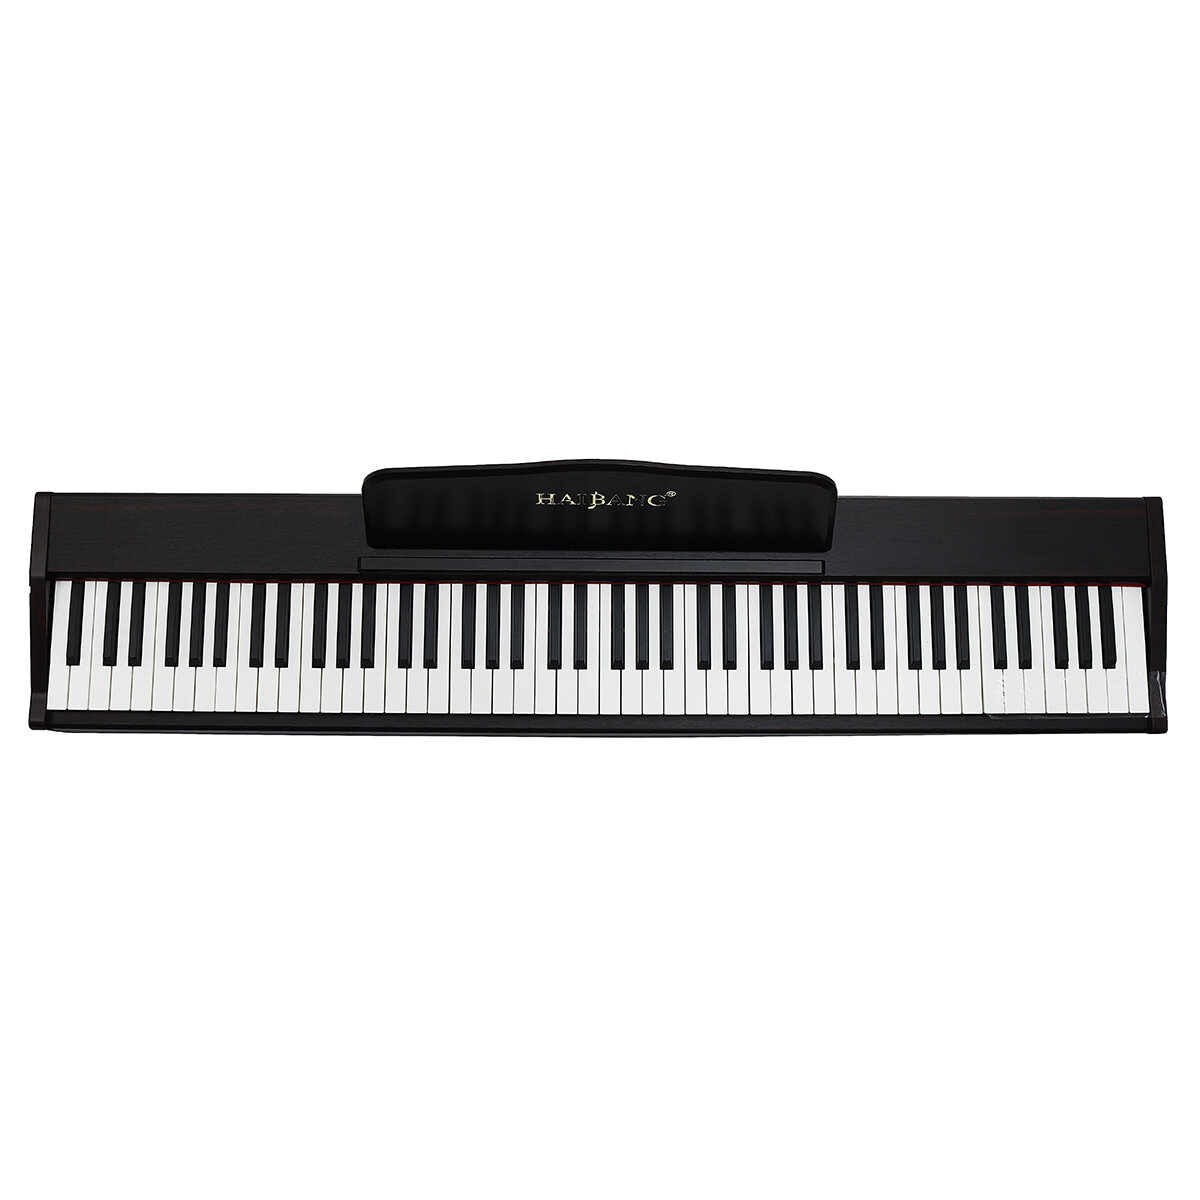 Image of HAIBANG DP-100 88-key Heavy Hammer Keyboard 128 Polyphonic Electric Piano with Headphones